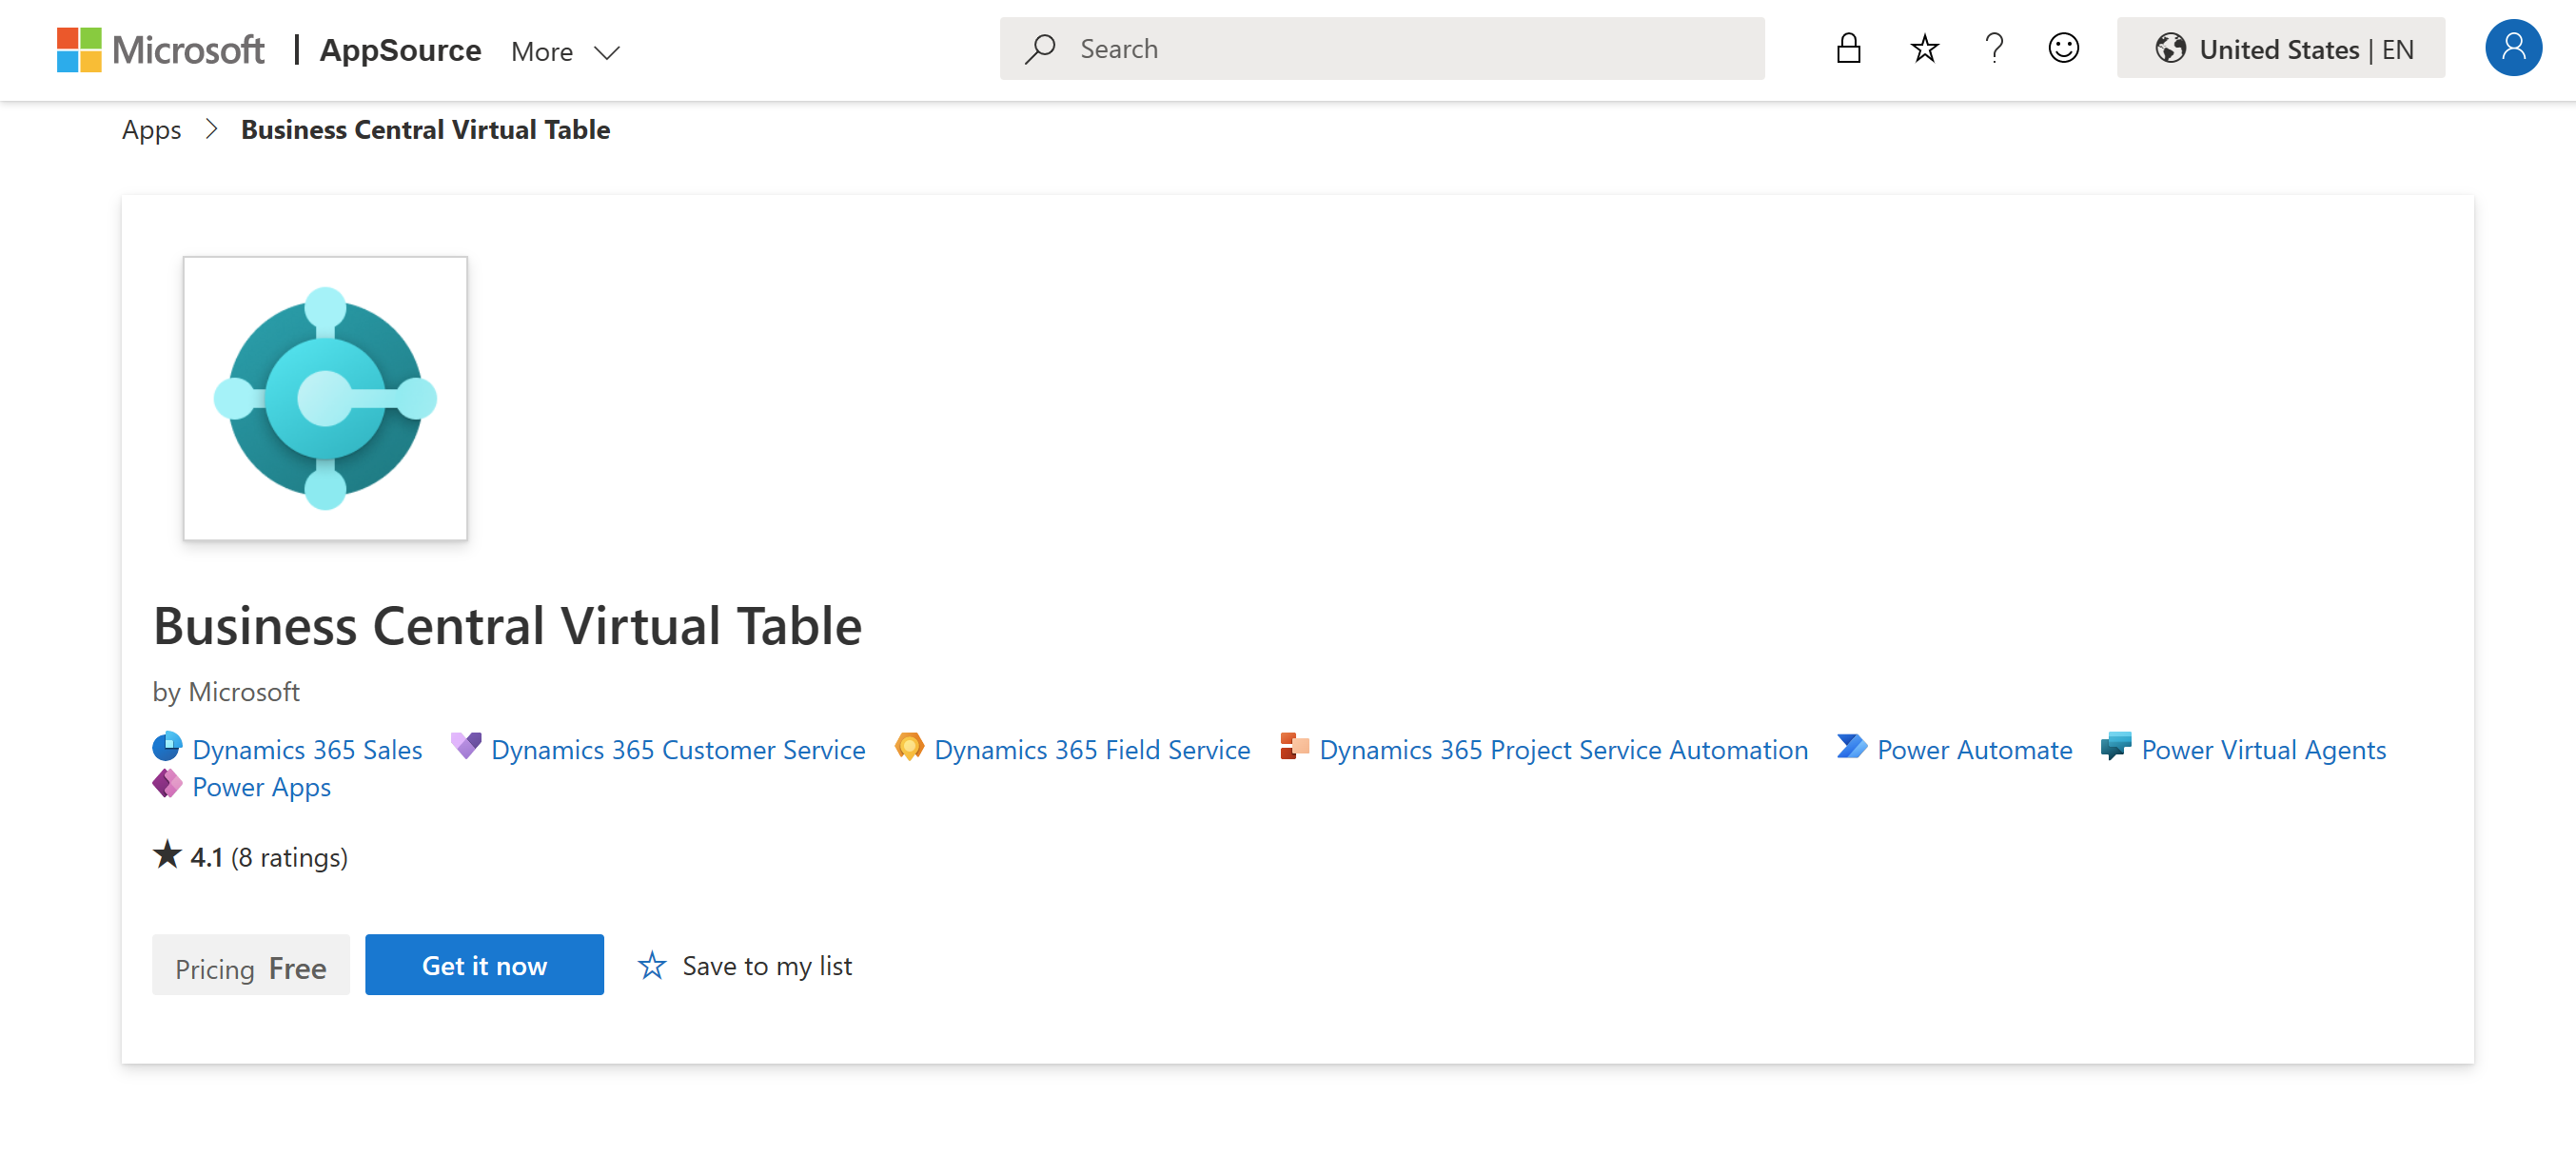 Screenshot of the Business Central Virtual Table app from AppSource